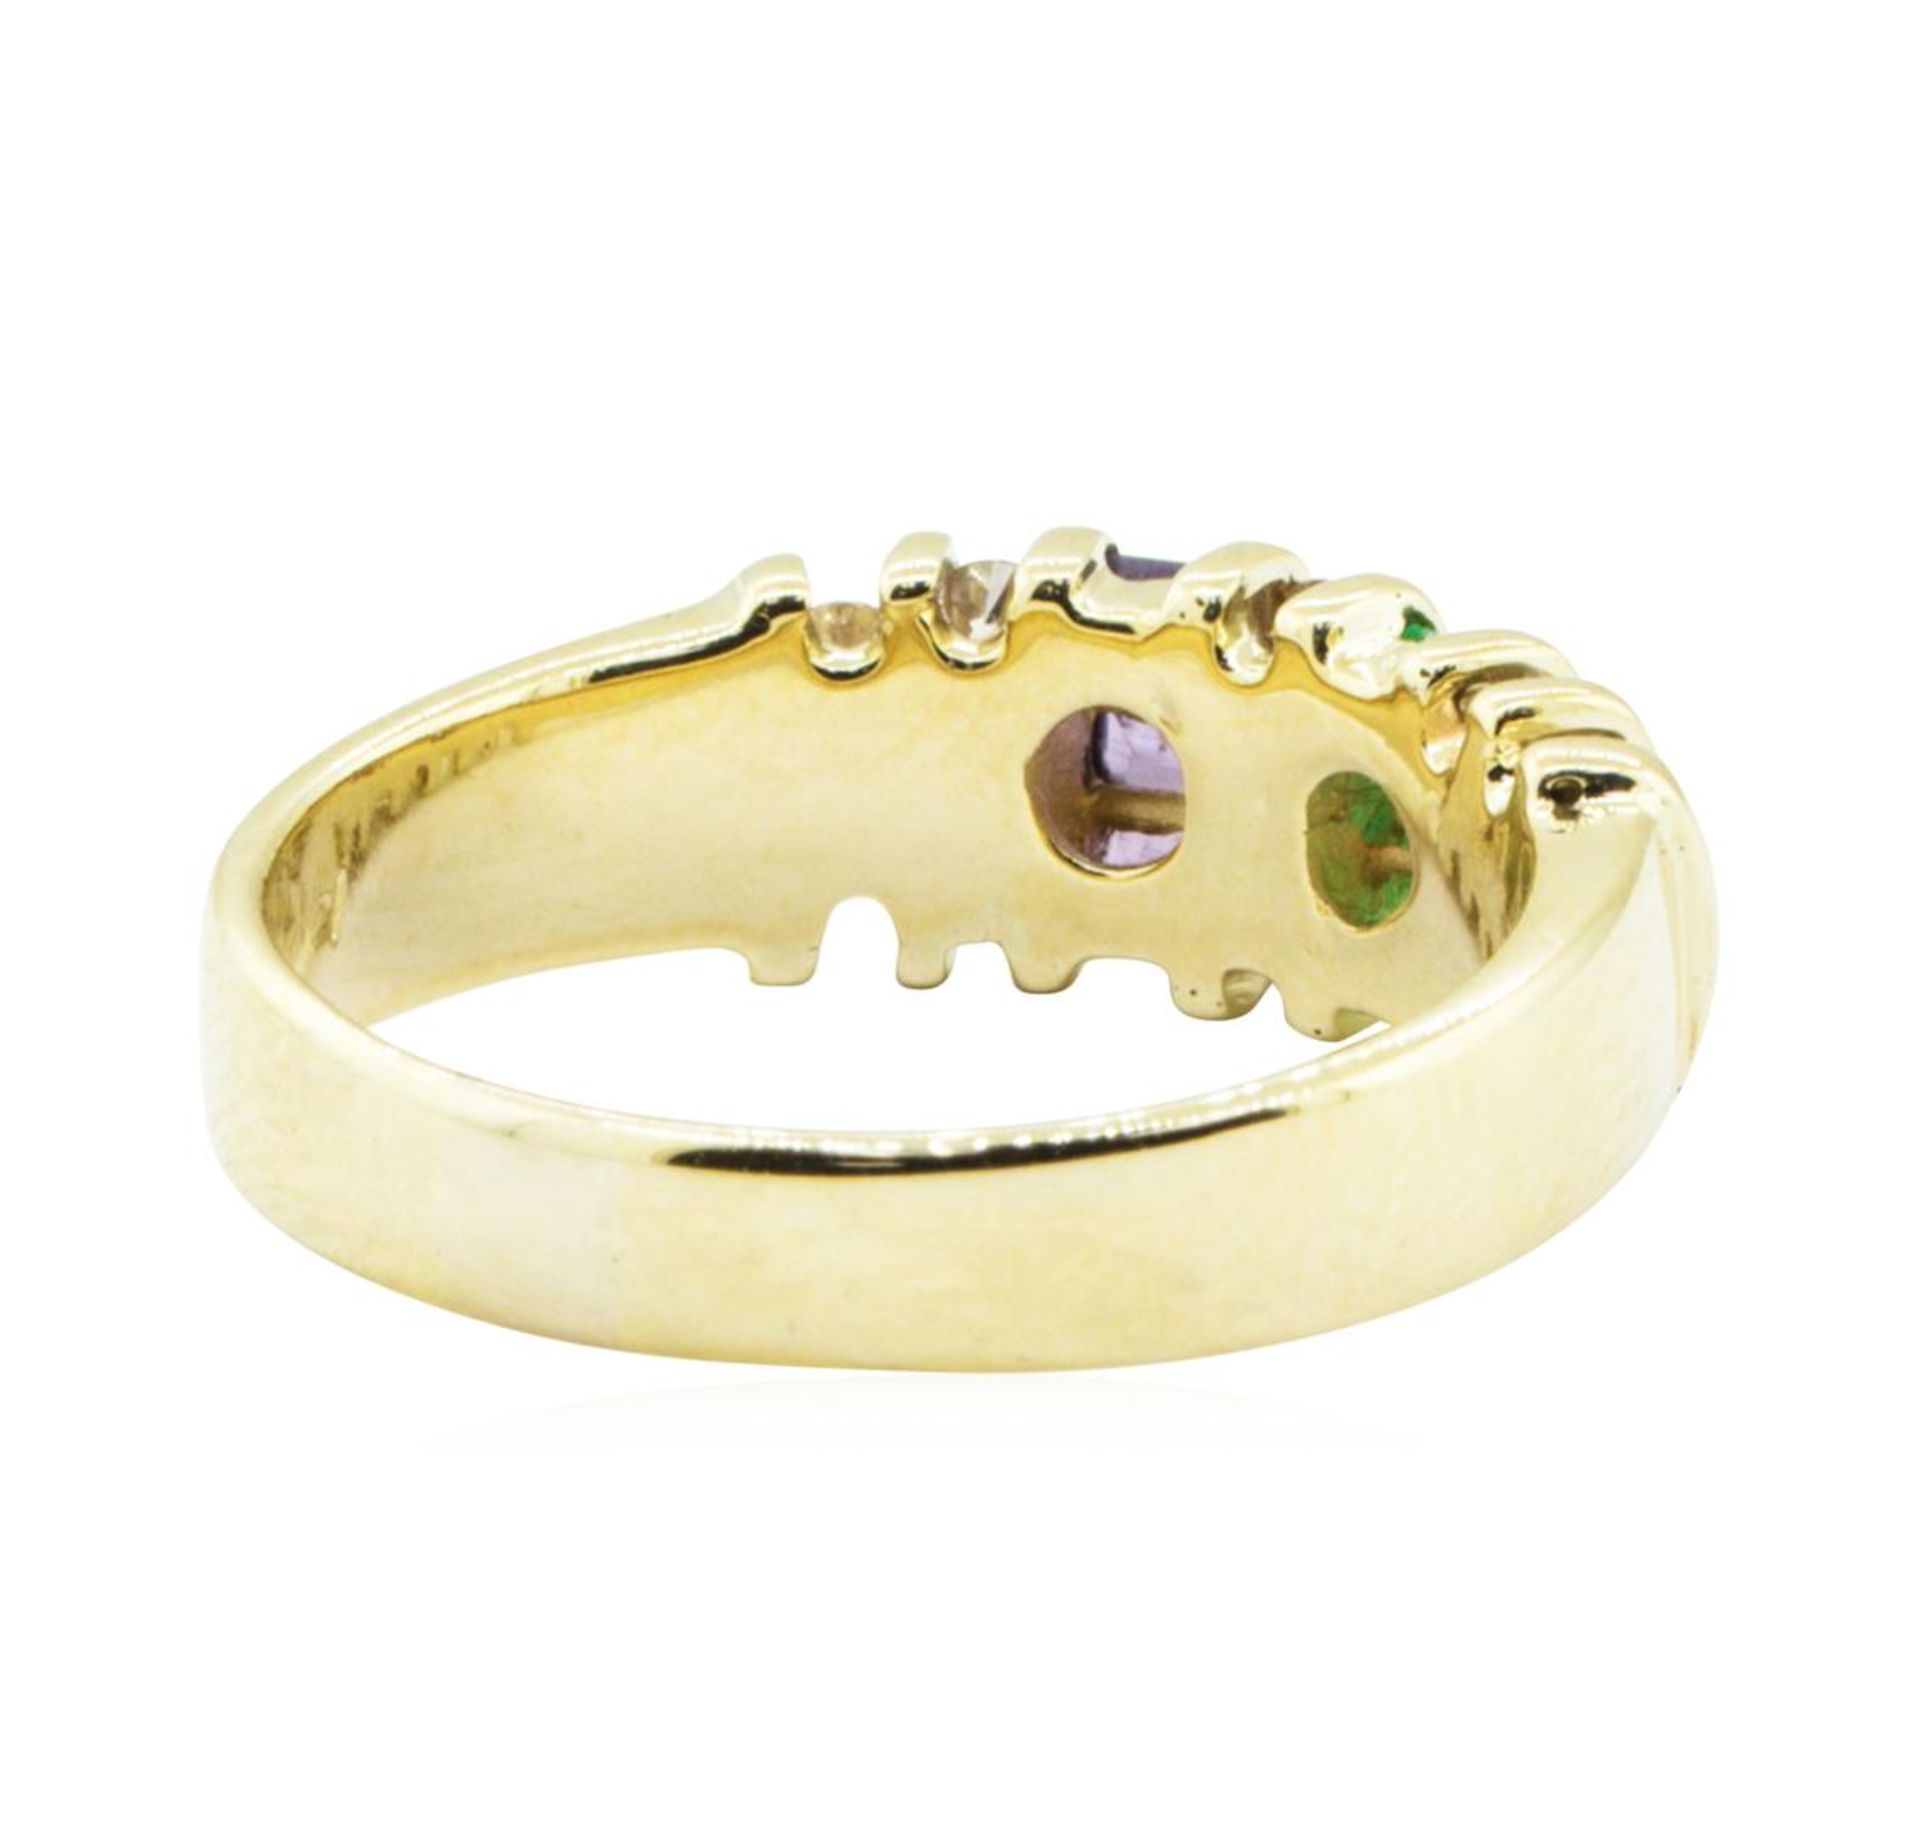 0.90 ctw Diamond, Amethyst, and Emerald Ring - 14KT Yellow Gold - Image 3 of 4